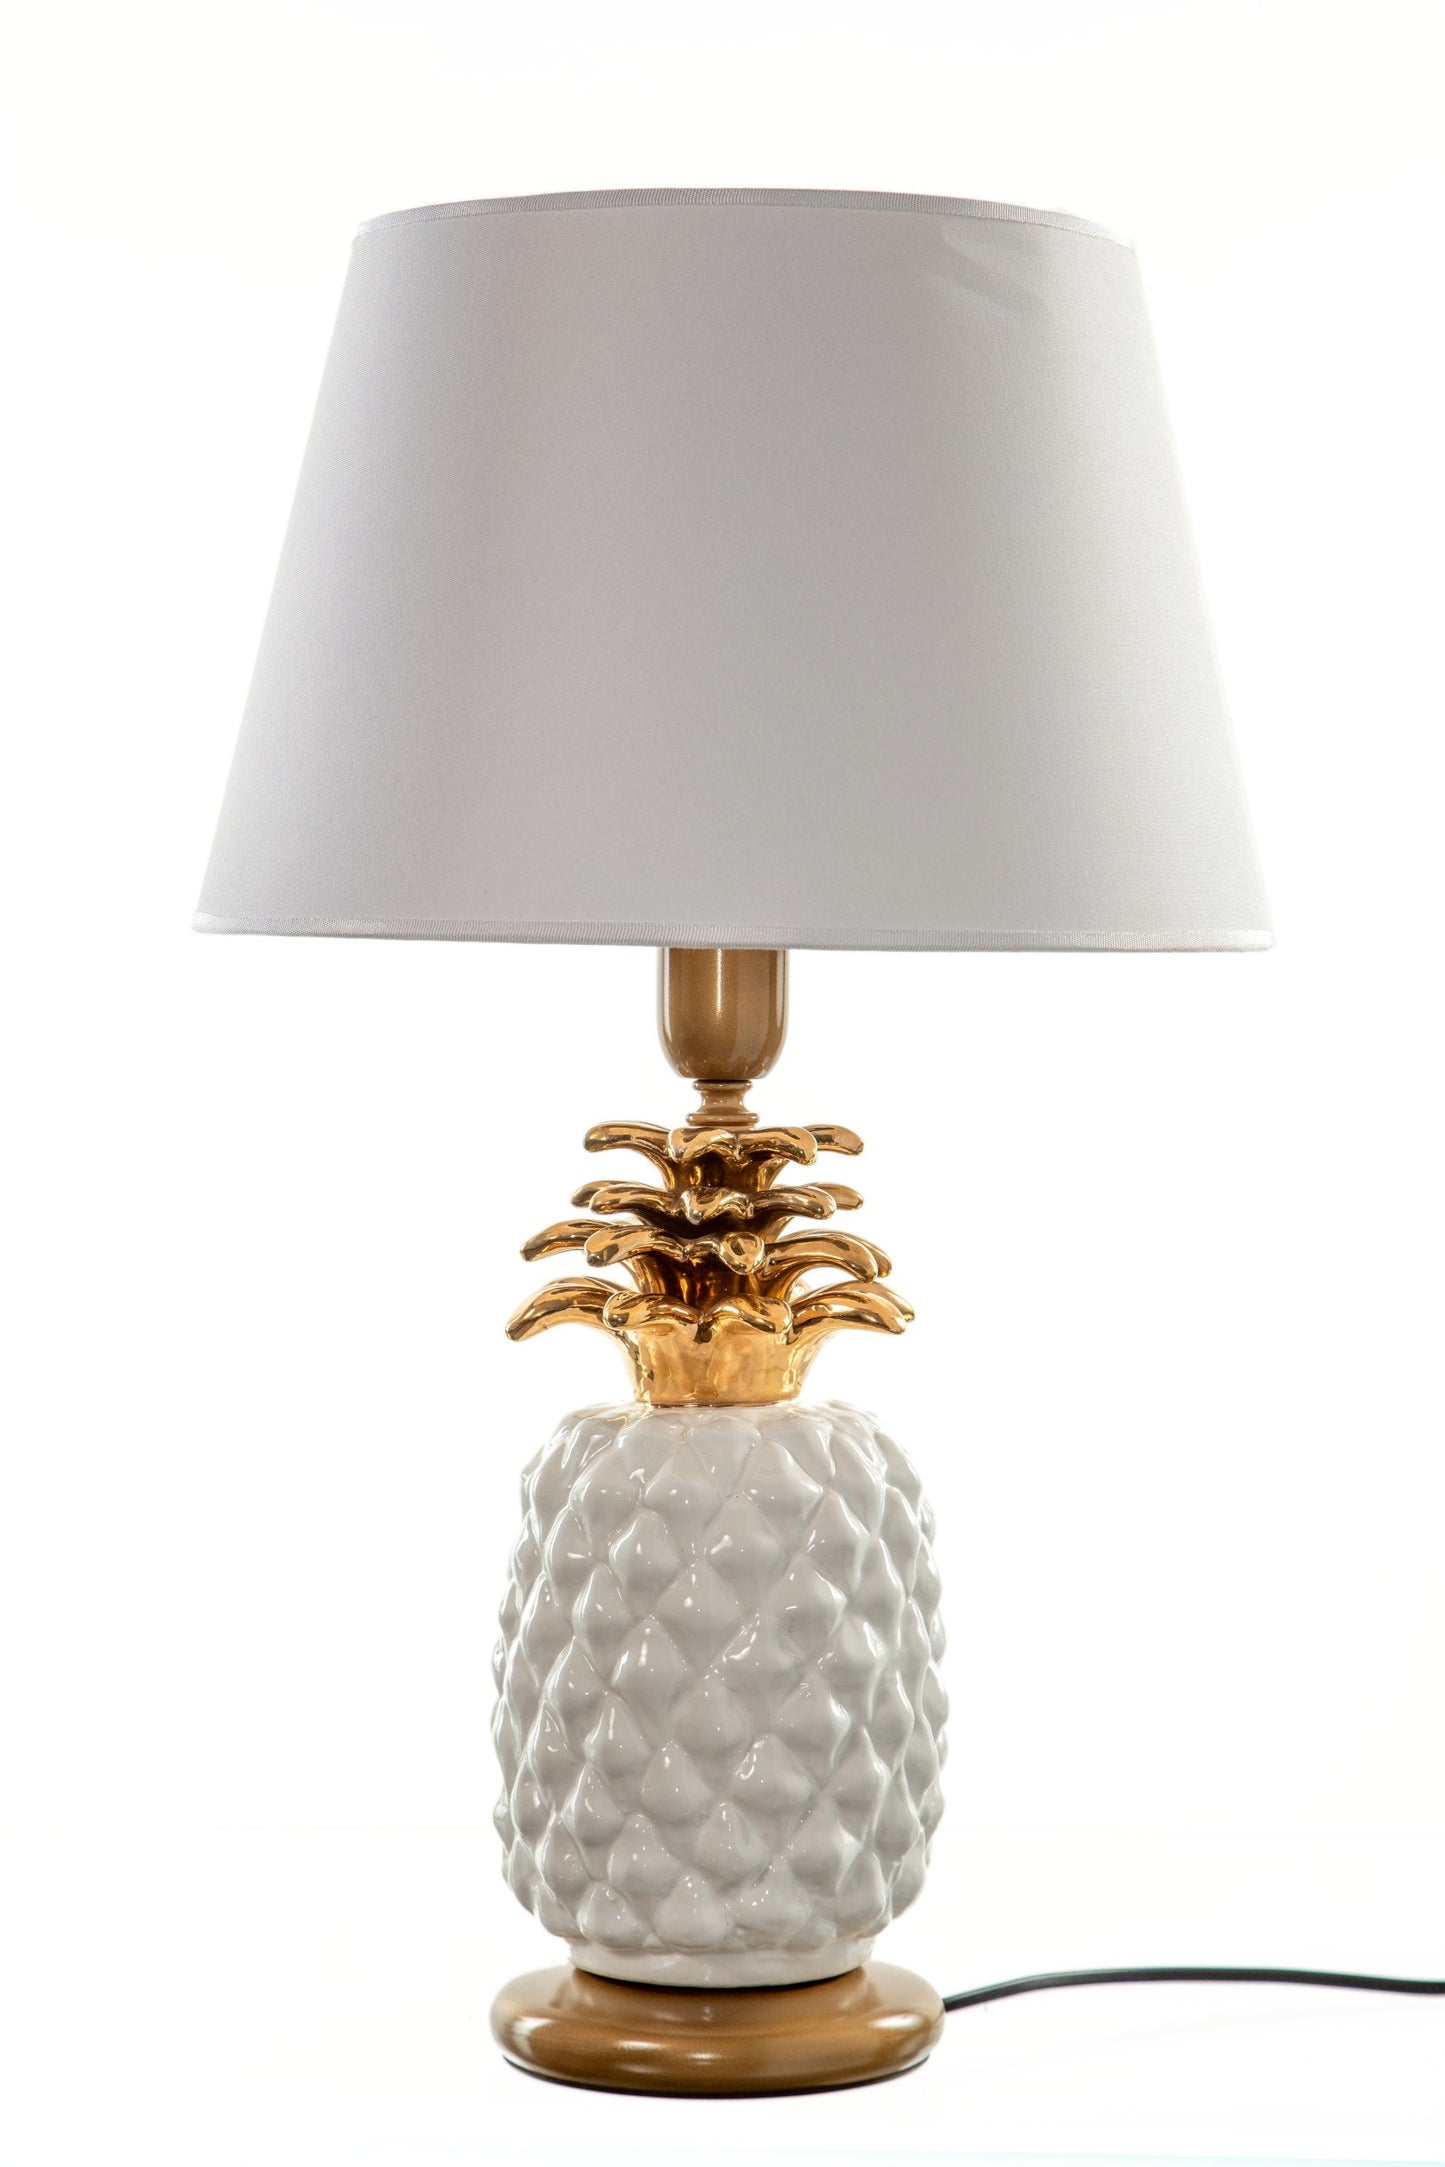 Pair of 70s pineapple table lamps